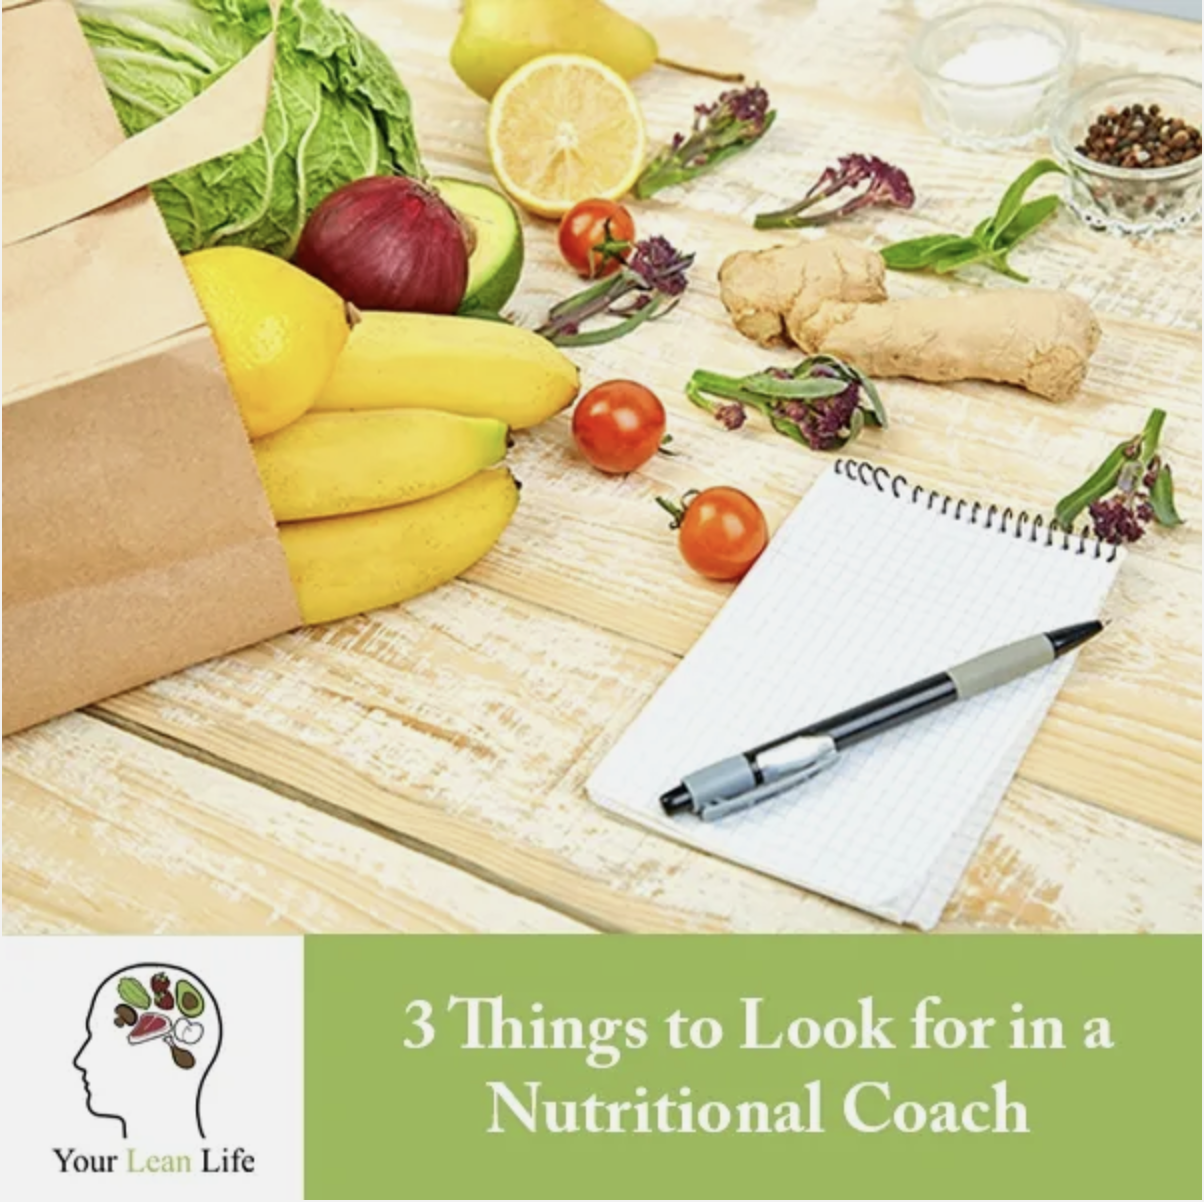 3 Things to Look for in a Nutritional Coach